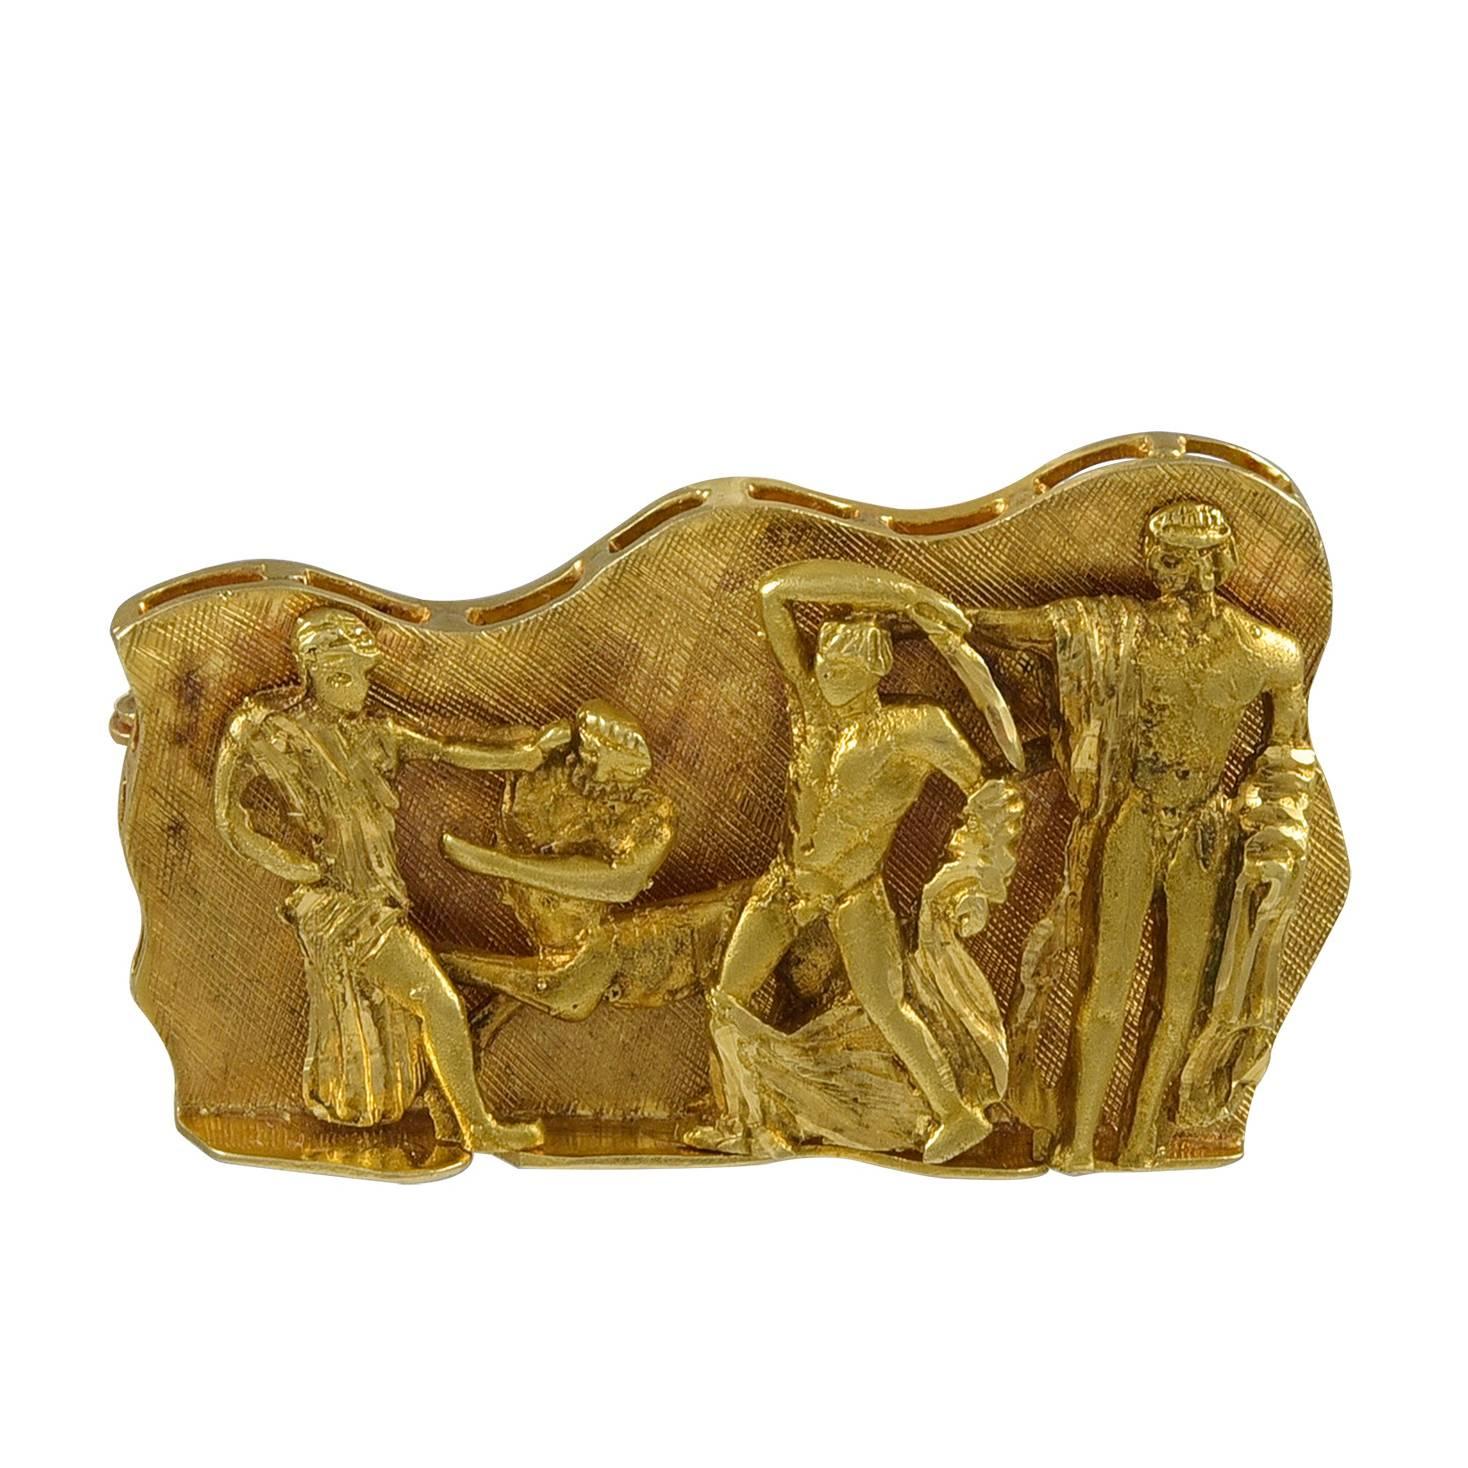 A Neoclassical Revivalist Gold Brooch.